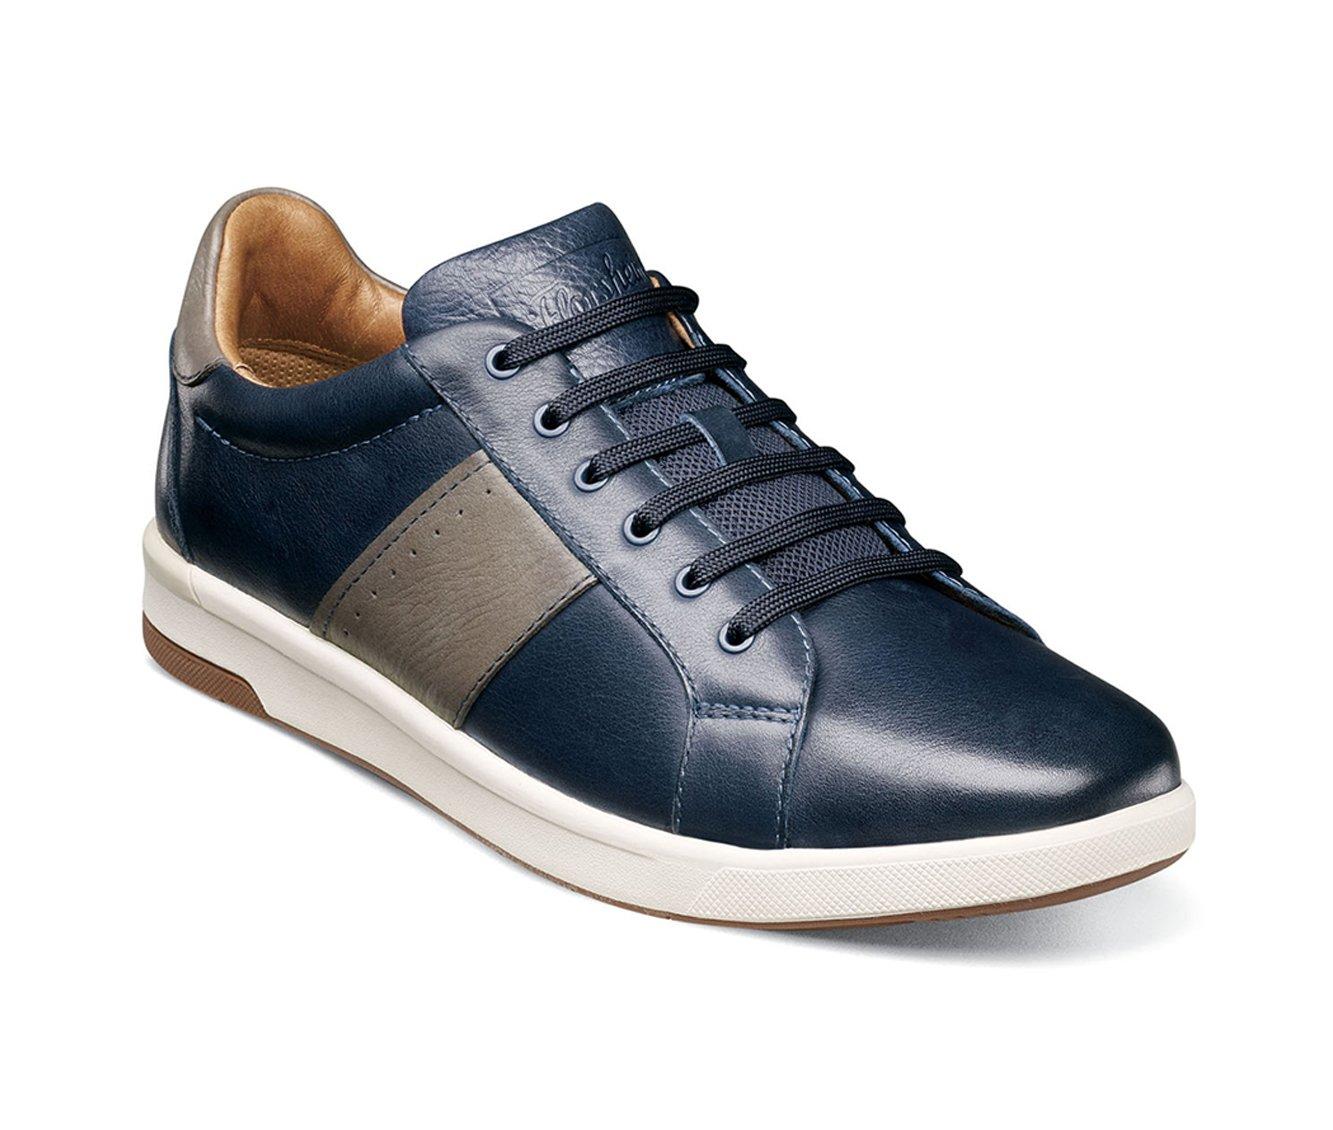 Men's Florsheim Crossover Lace to Toe Sneakers | Shoe Carnival